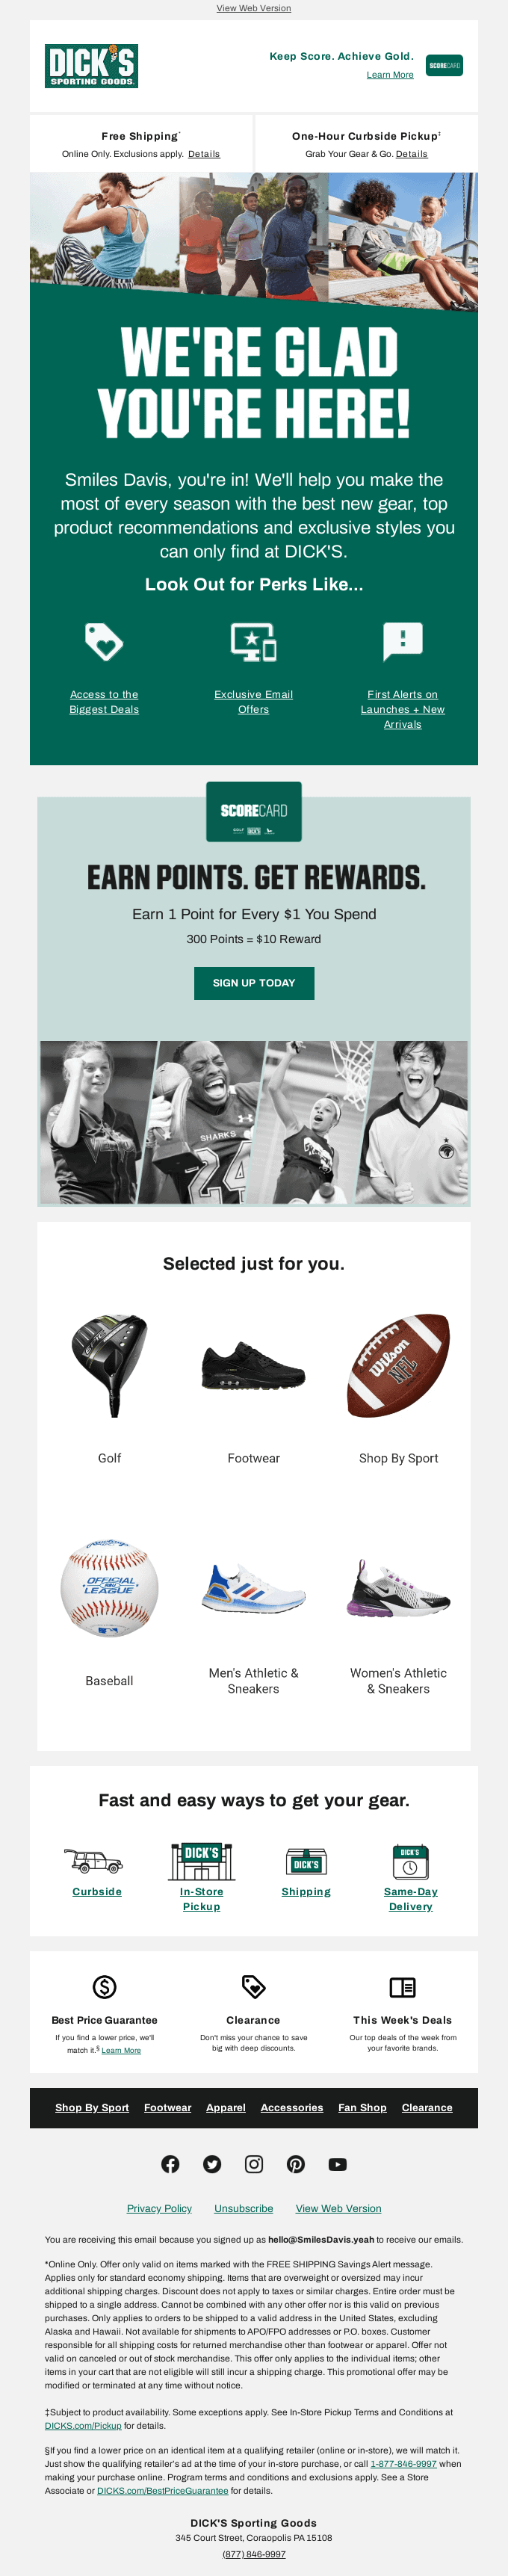 welcome email personalization example by Dick's Sporting Goods